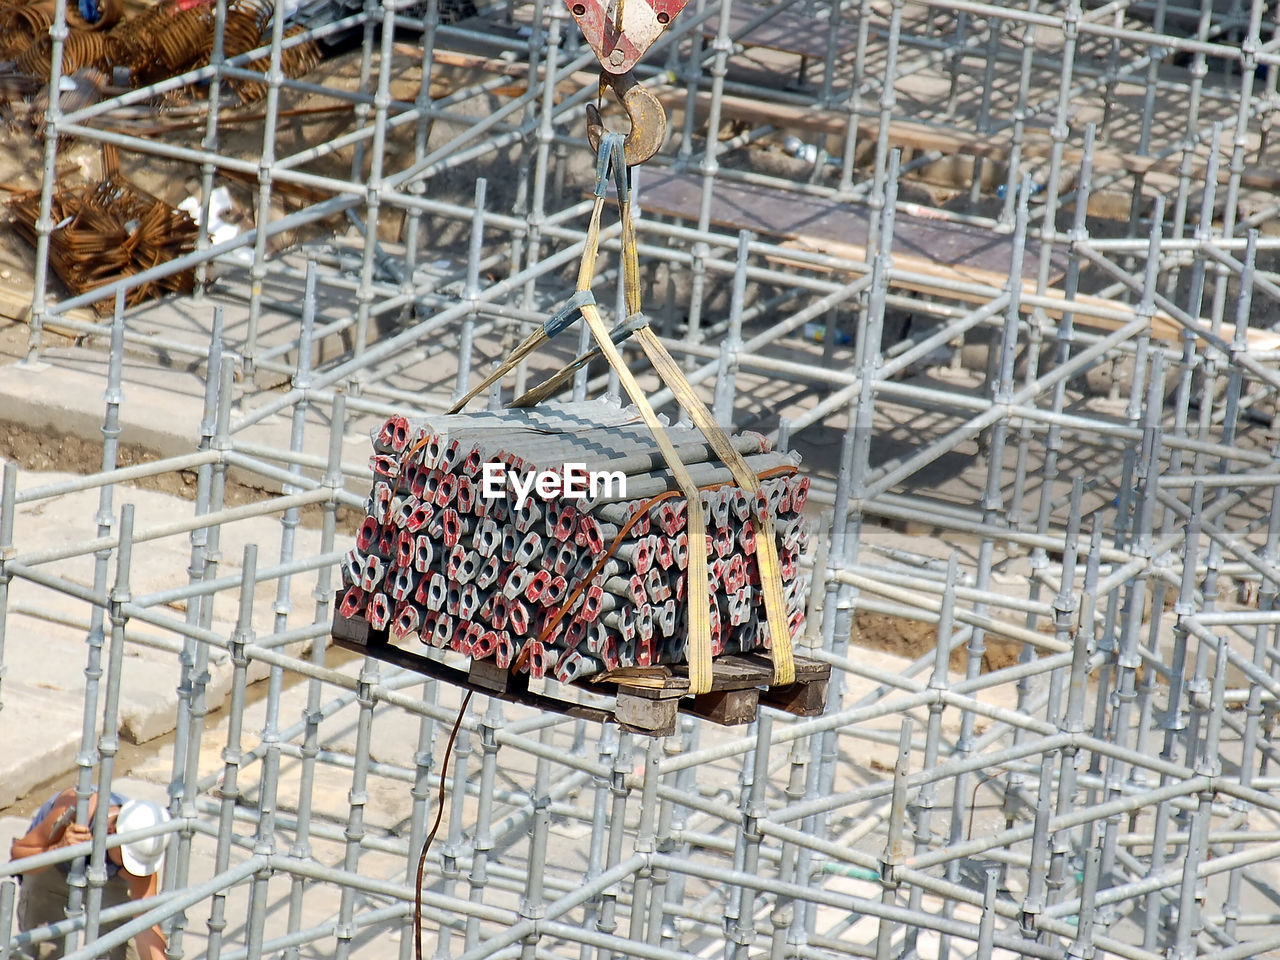 Scaffolding components transported by crane